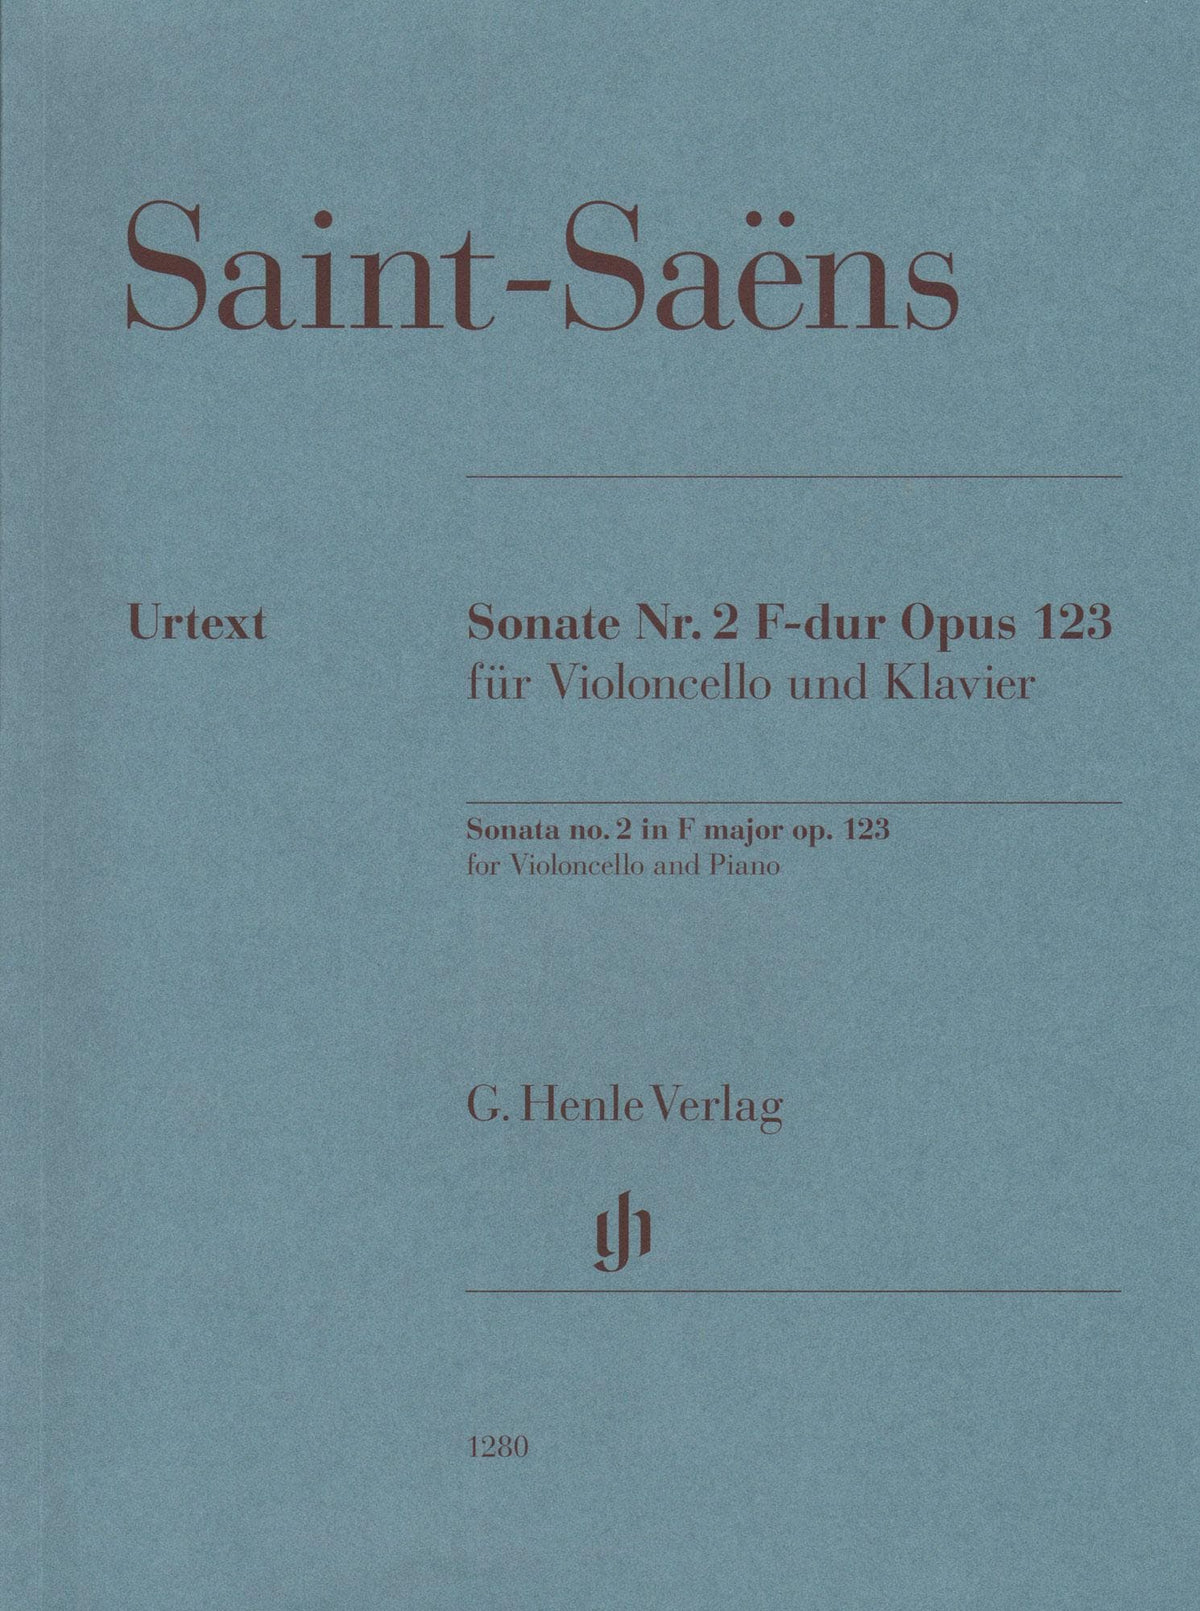 Saint-Saëns, Camille - Sonata No. 2 in F major, Opus 123 - for Cello and Piano - edited by Jost, Geringas, and Rogé - G. Henle Verlag URTEXT